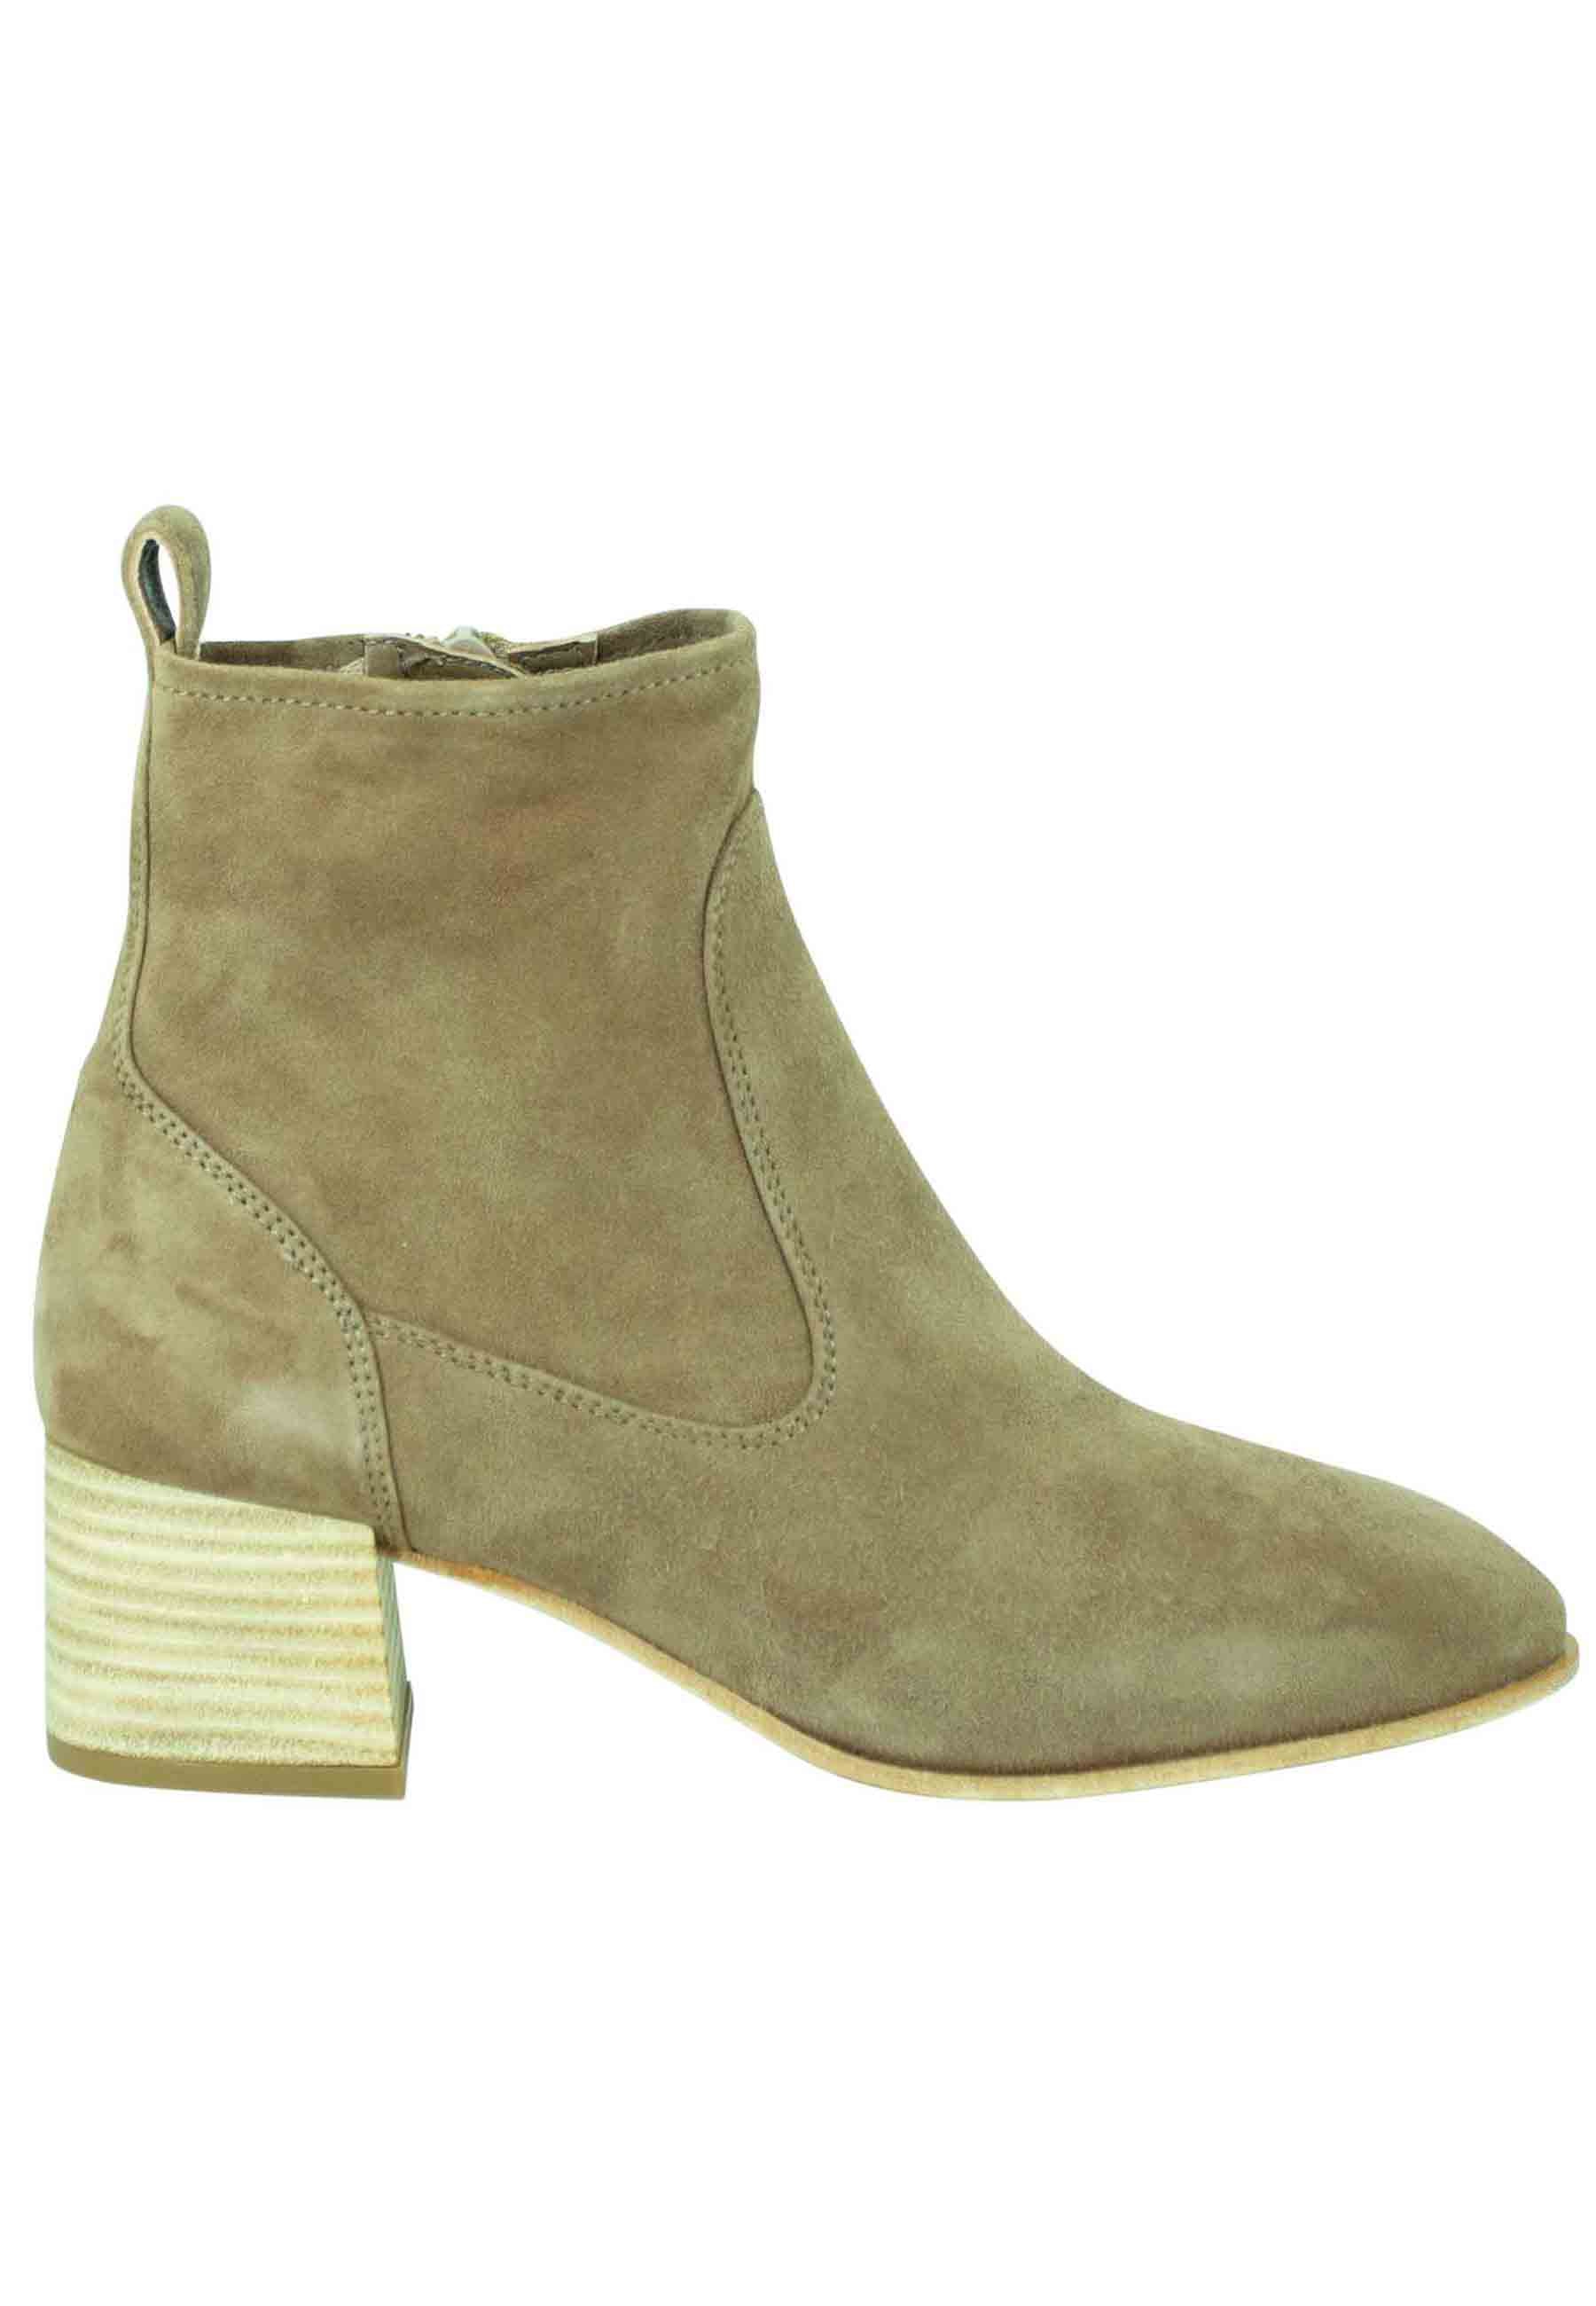 Women's unlined taupe suede ankle boots with natural leather heel